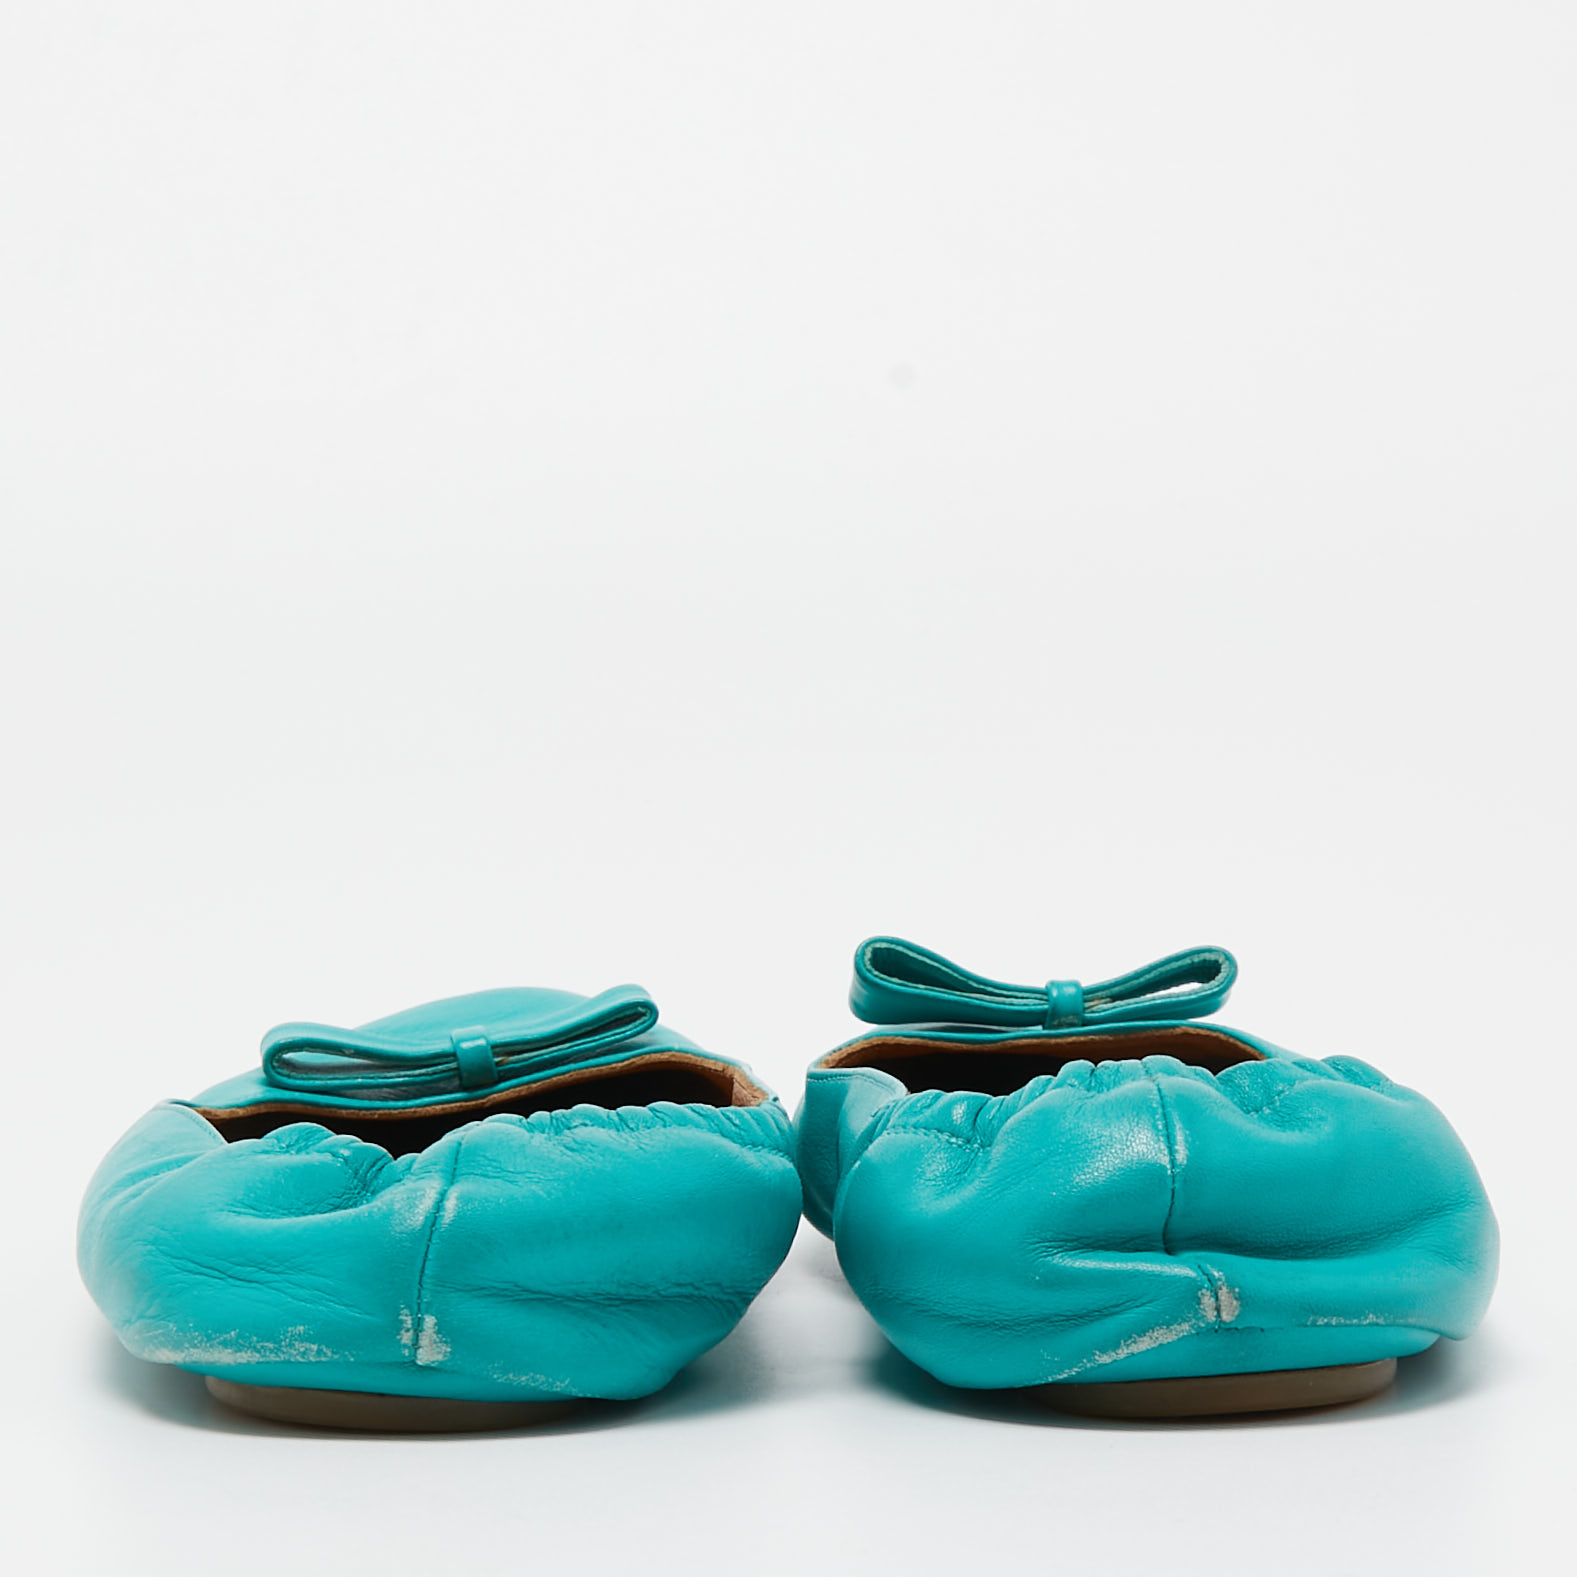 Fendi Turquoise Leather Bow Scrunch Ballet Flats Size 39